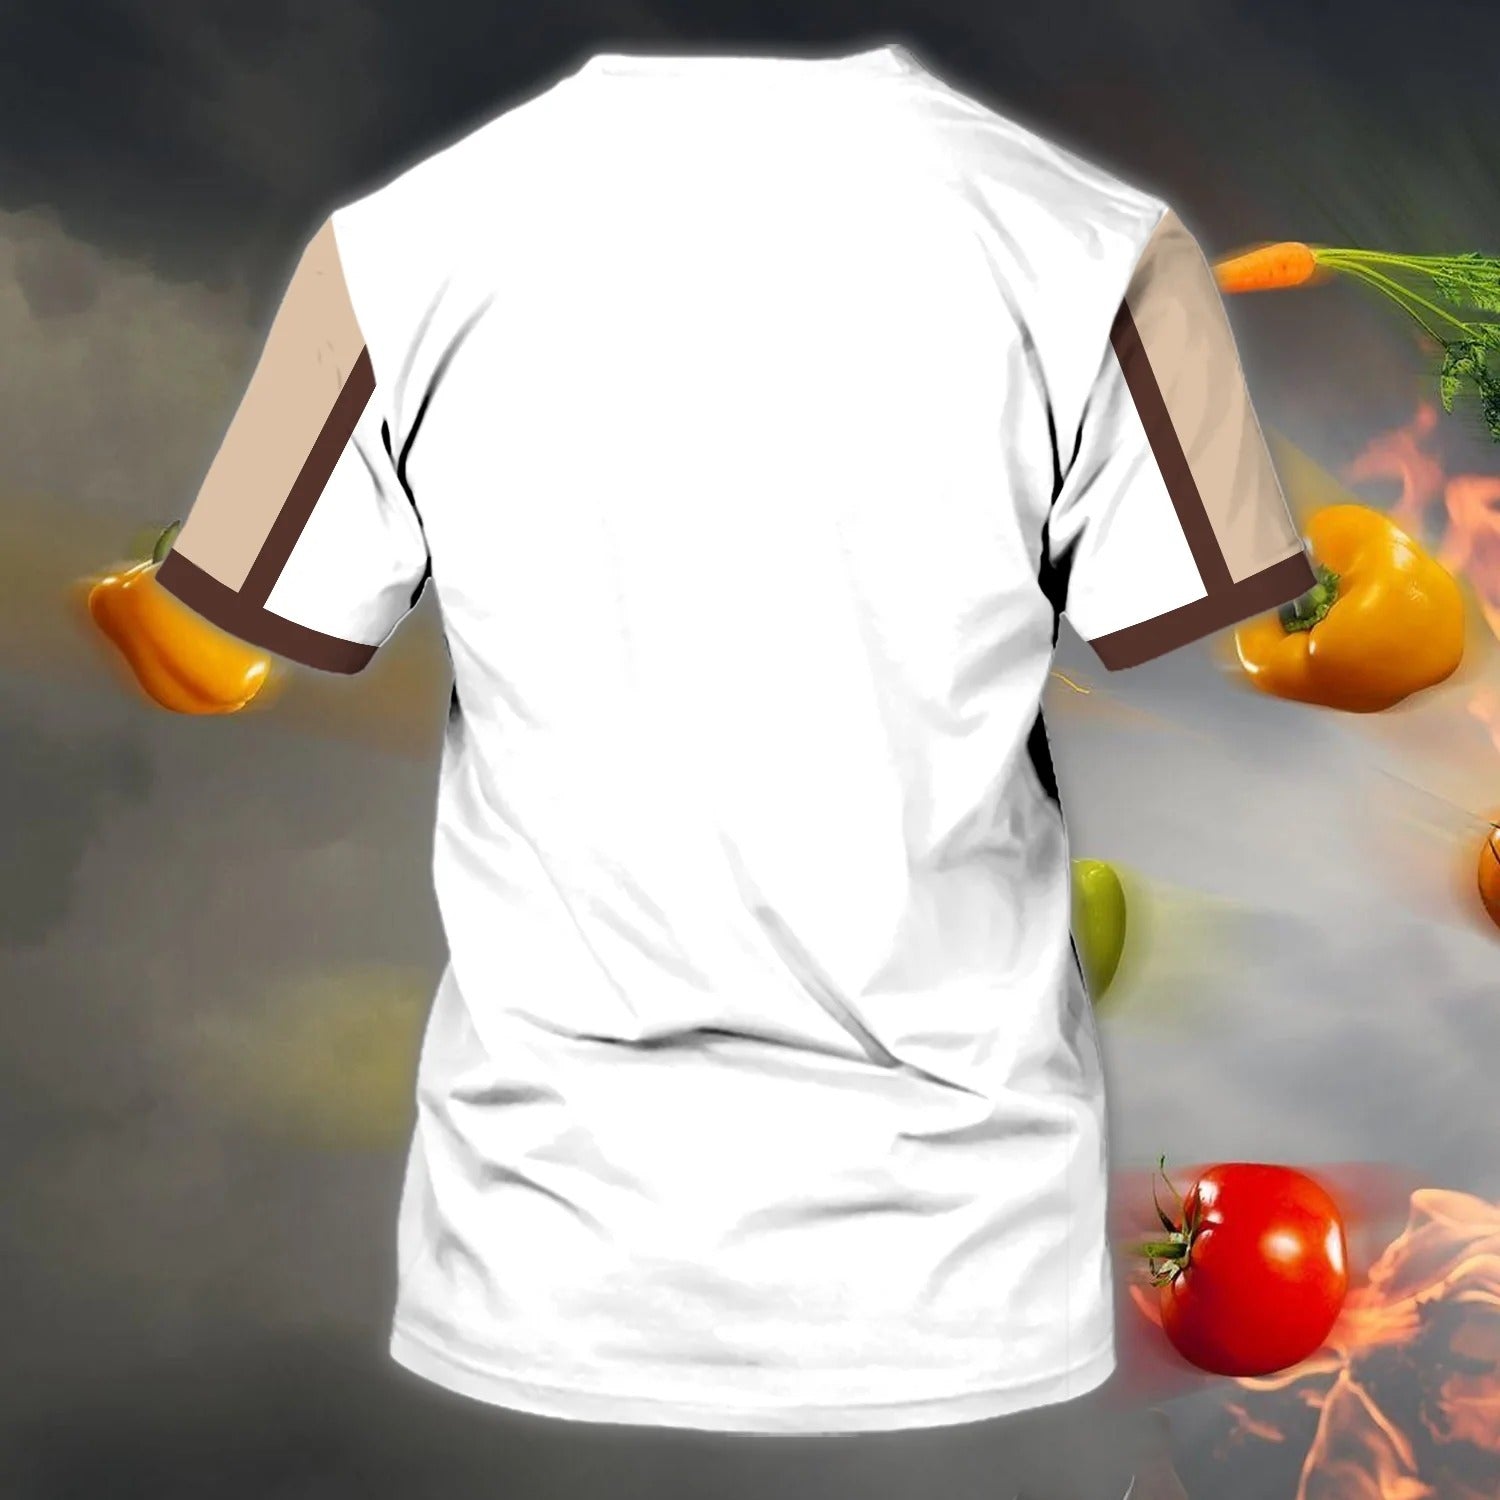 Coolspod Tshirt For Master Chef/ Cooking Lover Shirts/ Chef Shirts